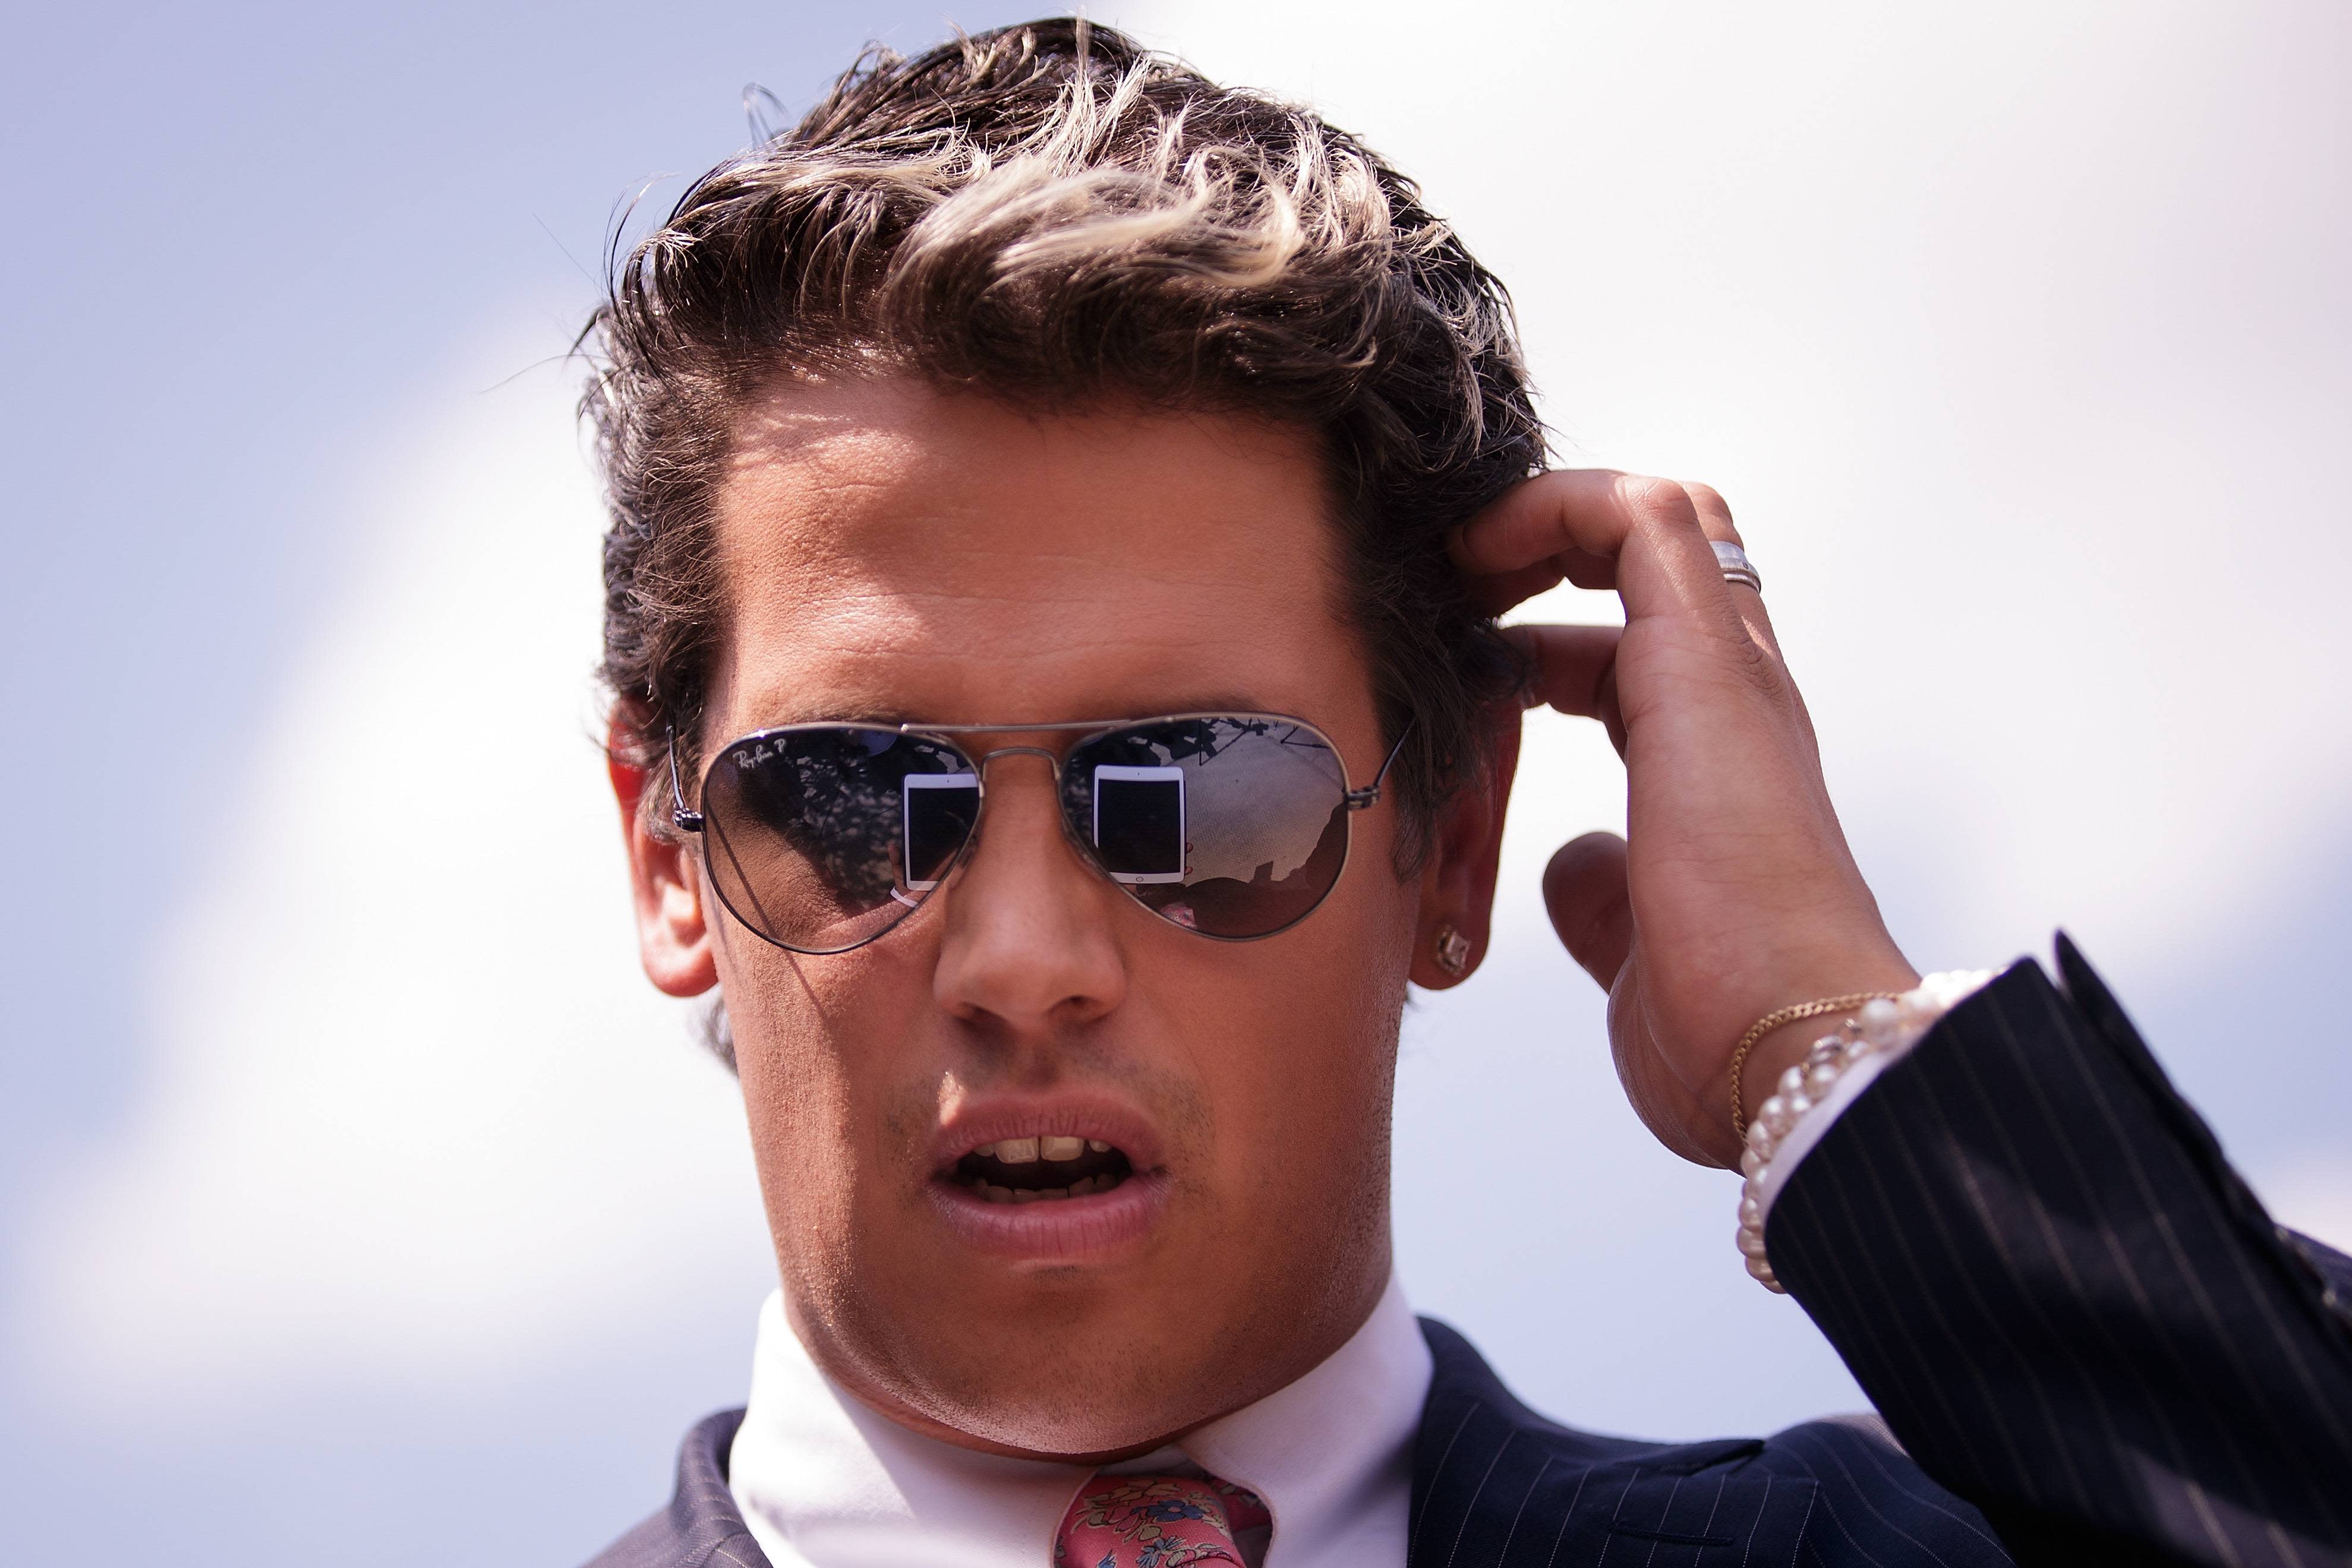 Breitbart Could Fire Yiannopoulos Over Pedophilia Comments